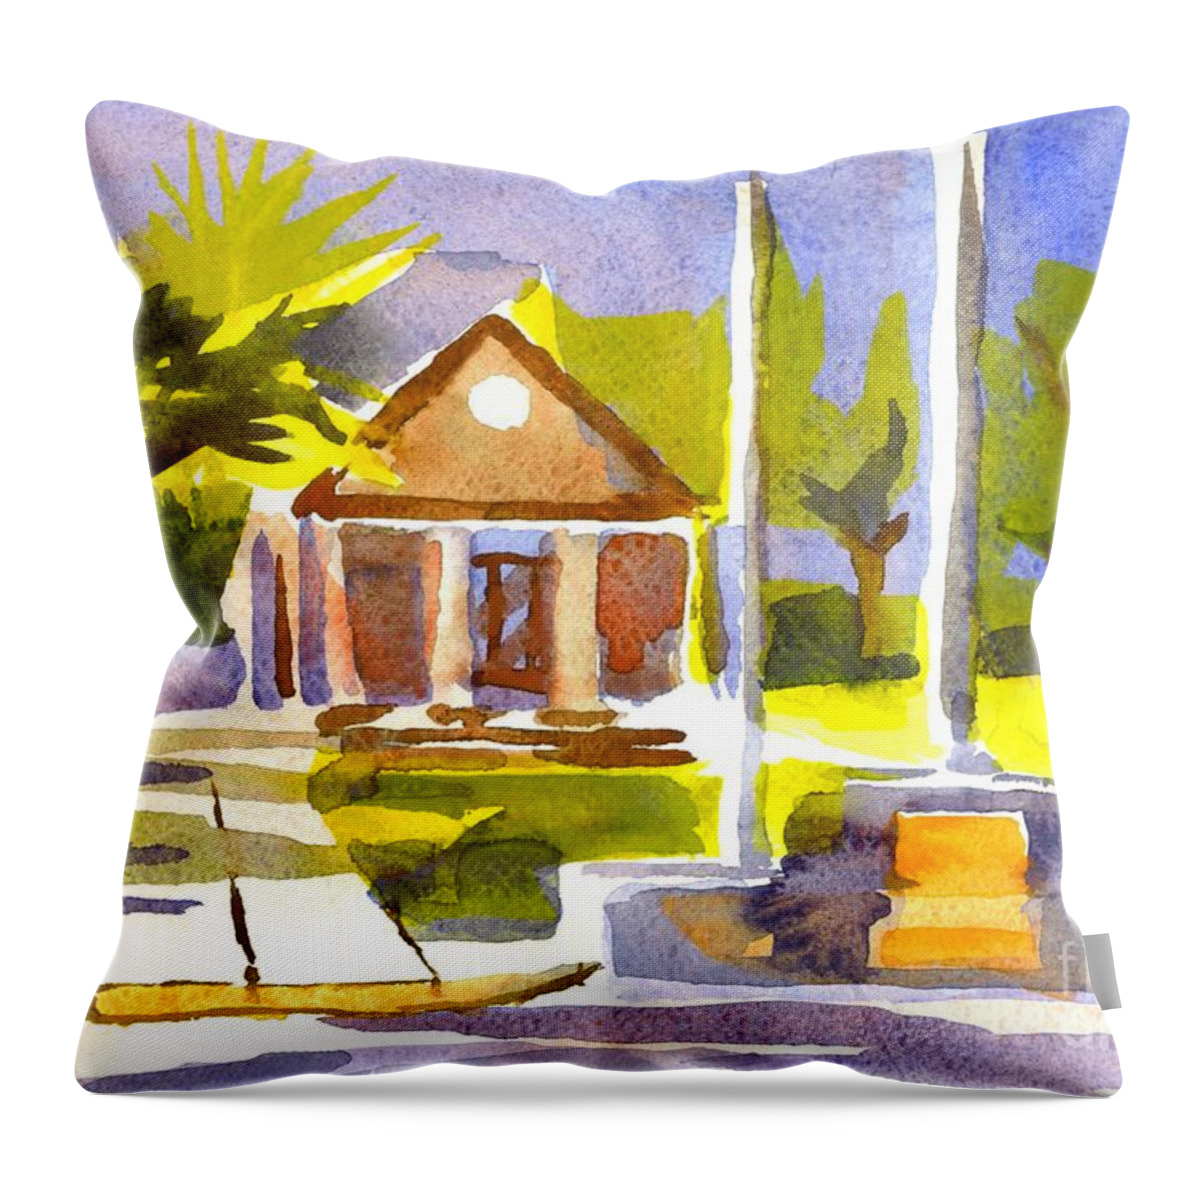 An Early Summers Morning Throw Pillow featuring the painting An Early Summers Morning by Kip DeVore